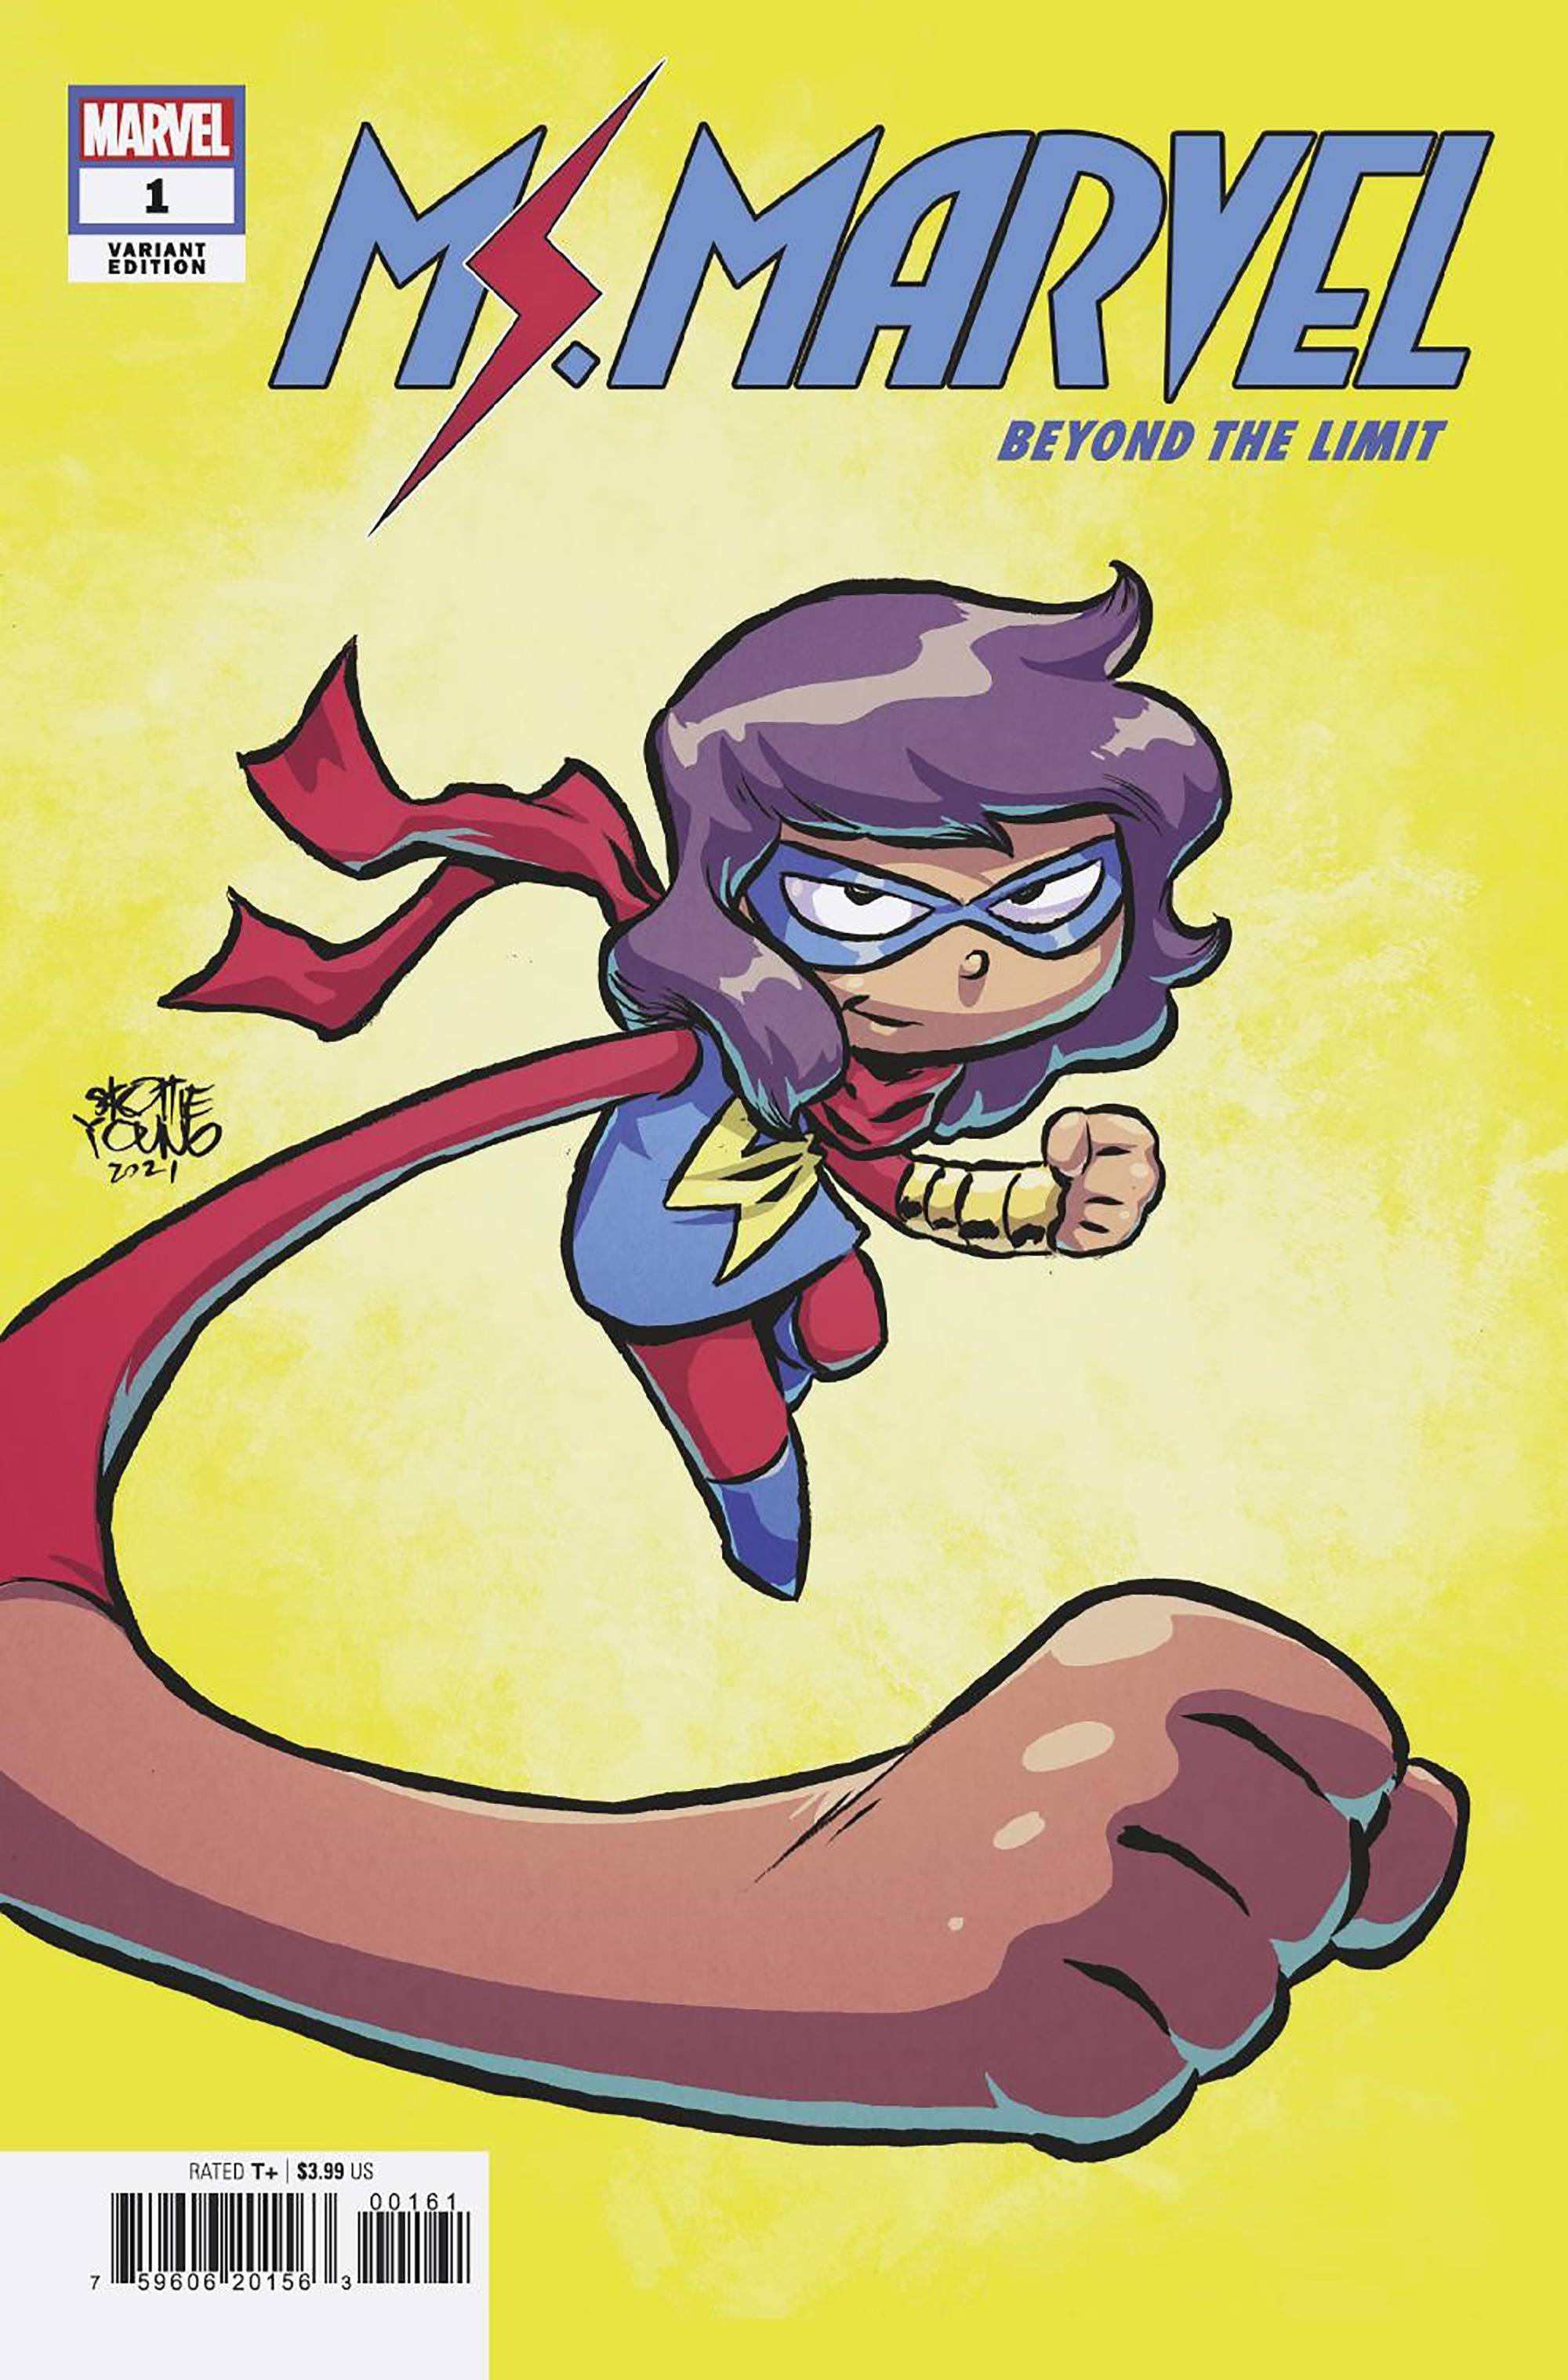 12/22/2021 MS MARVEL BEYOND LIMIT #1 (OF 5) YOUNG VAR